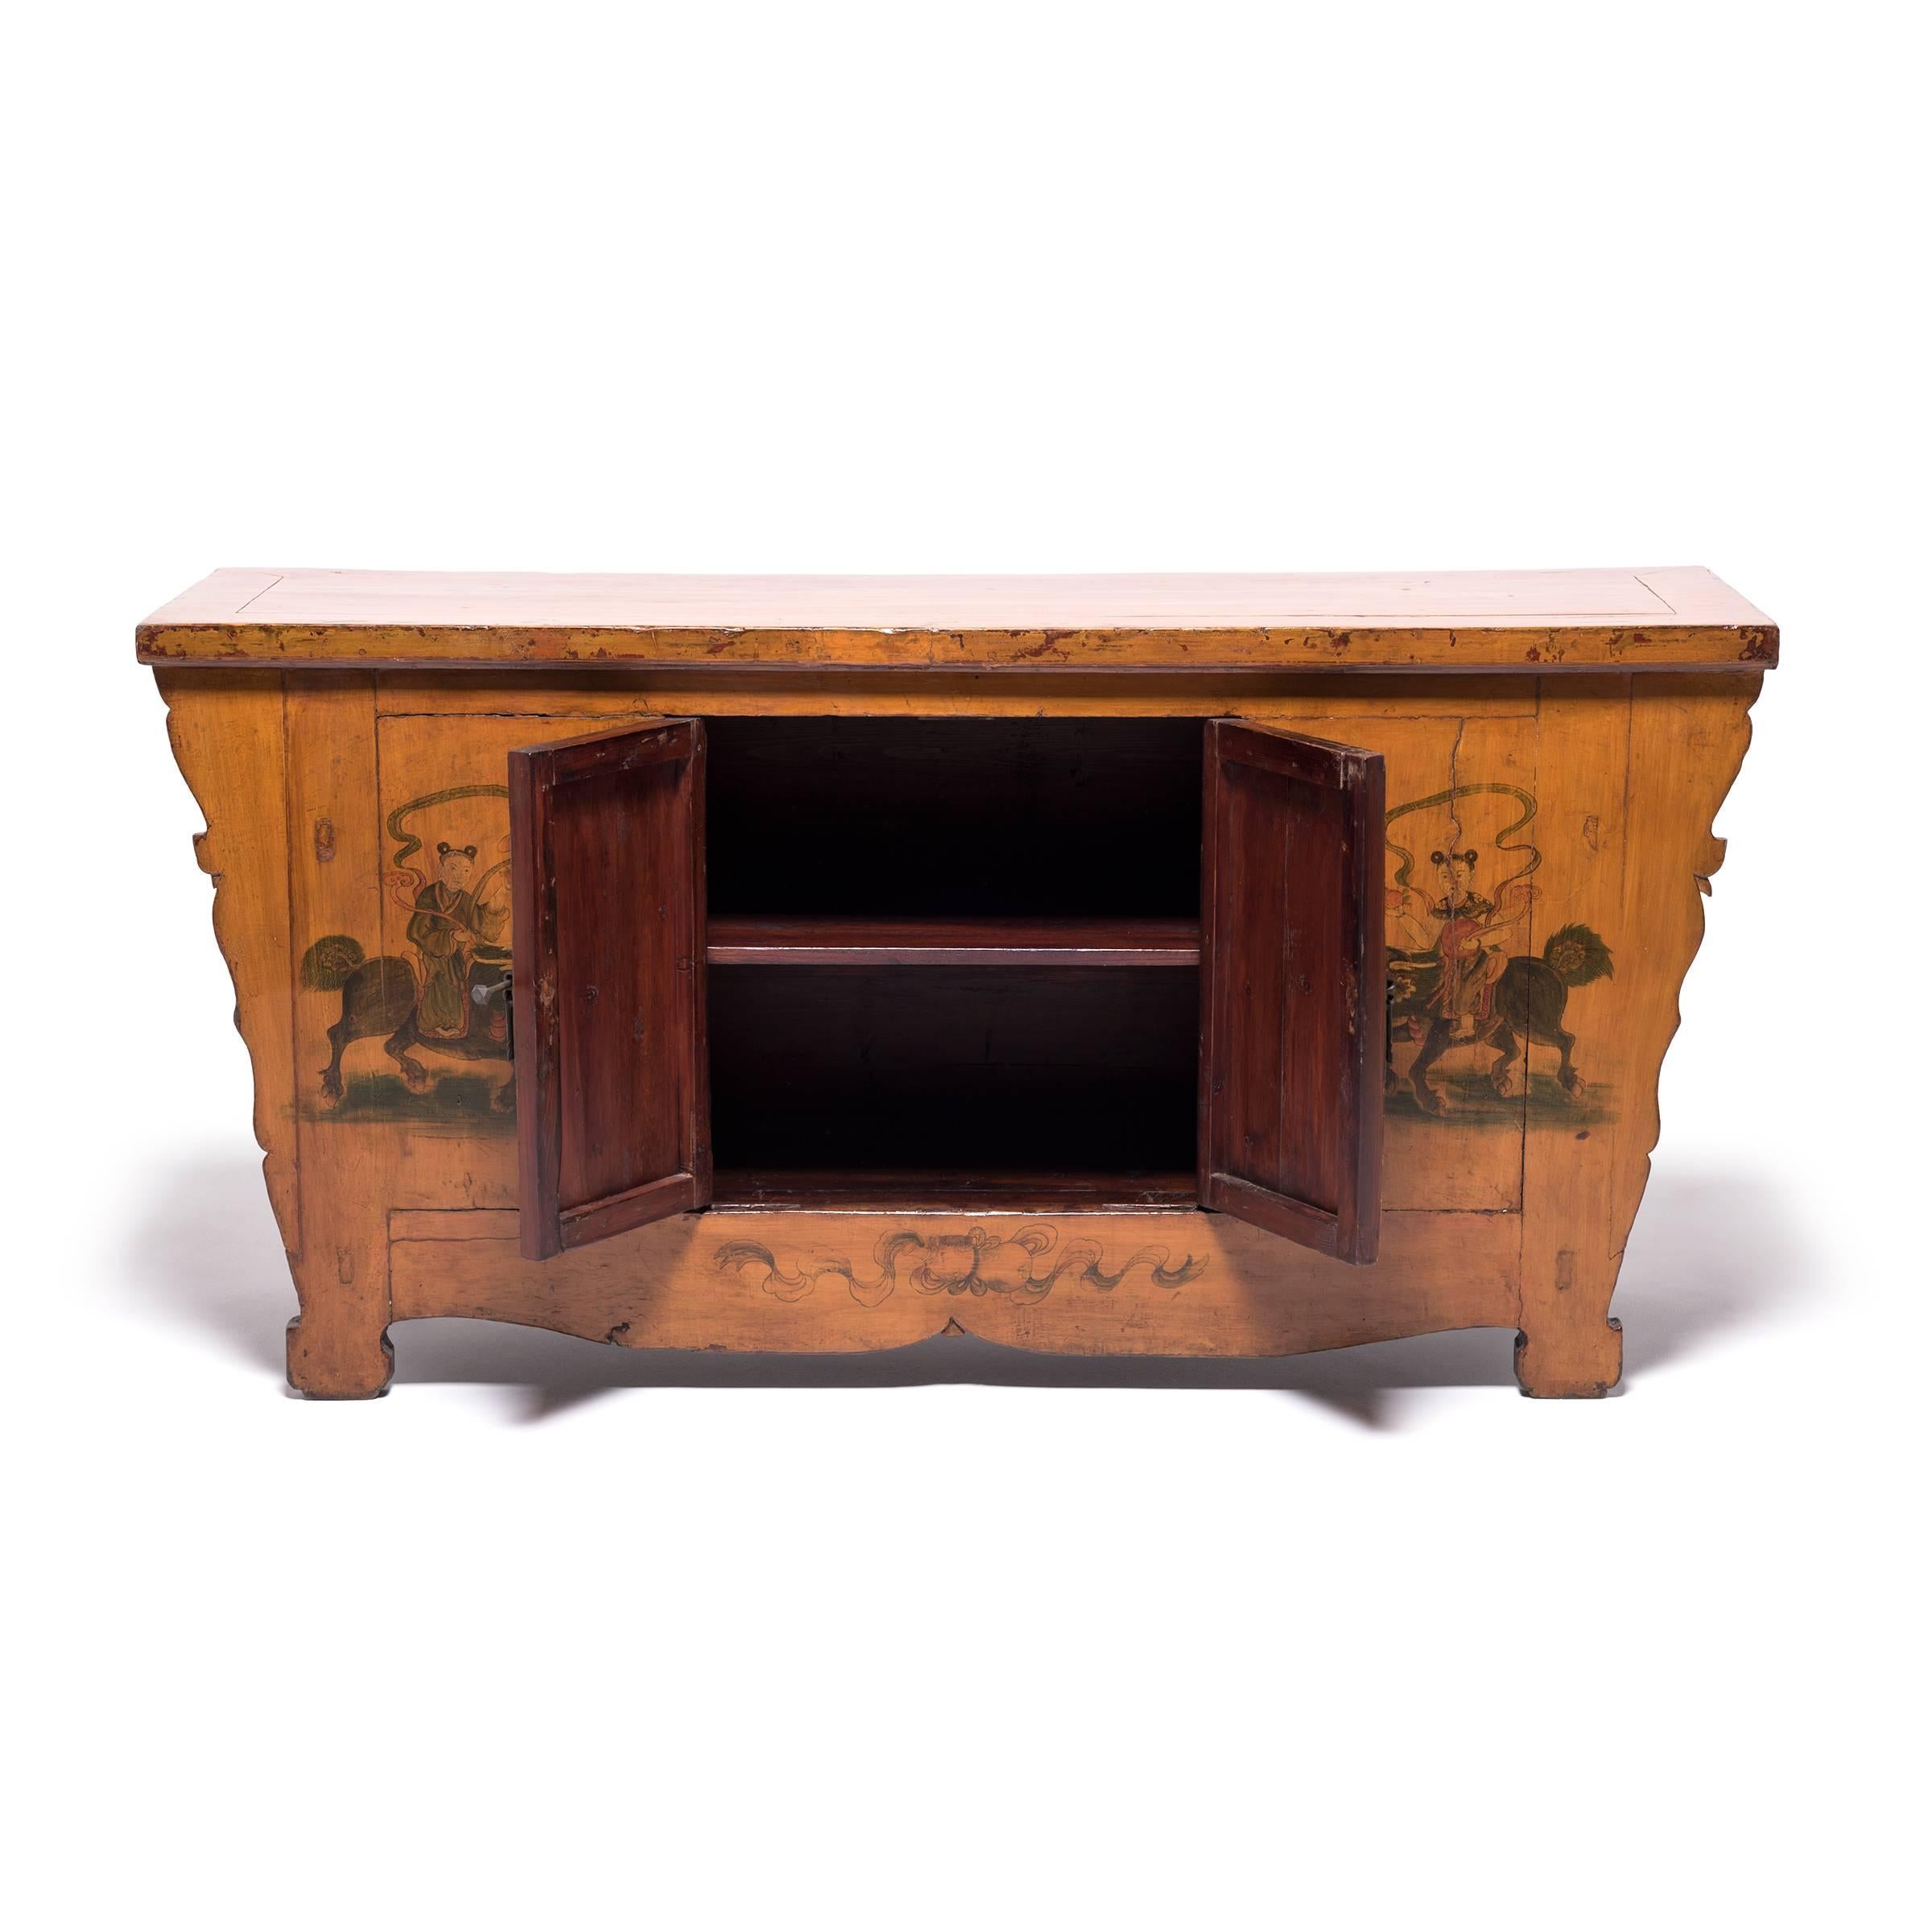 The paintings on this 19th century coffer from Mongolia are original and in impeccable condition. The hand-painted scene is fantastical—two traditionally dressed female figures are riding mythical Qilin lion dogs. The women are holding pomegranates